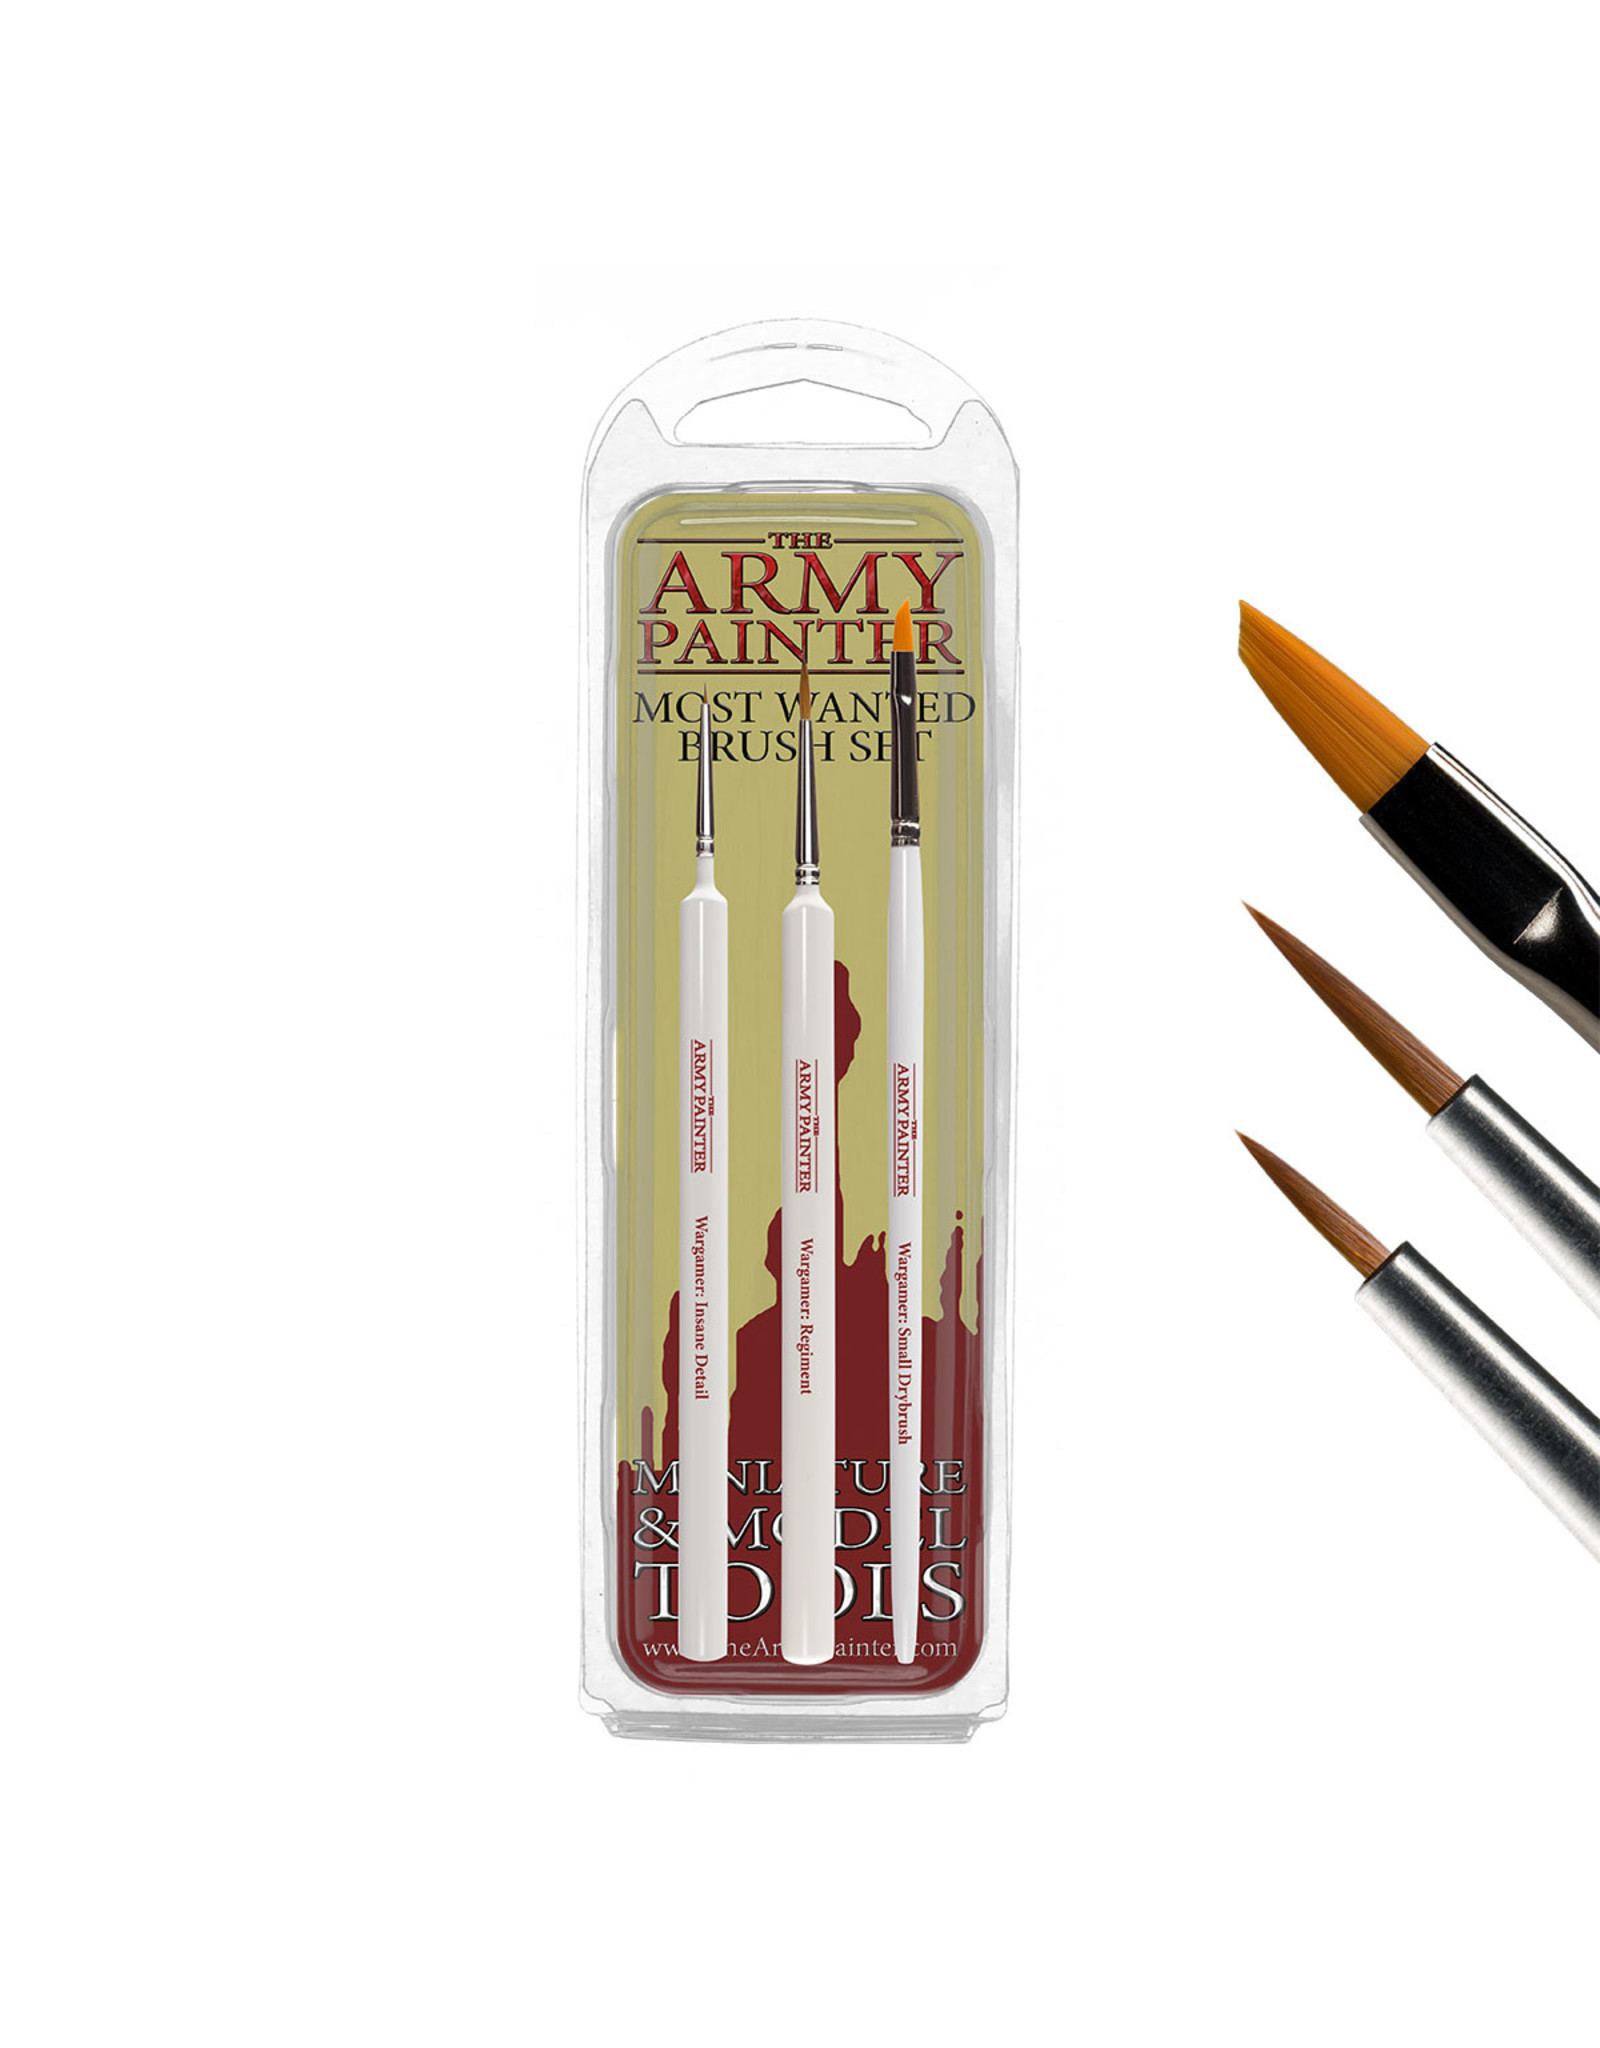 The Army Painter TL5043 Wargamers Most Wanted Brush Set